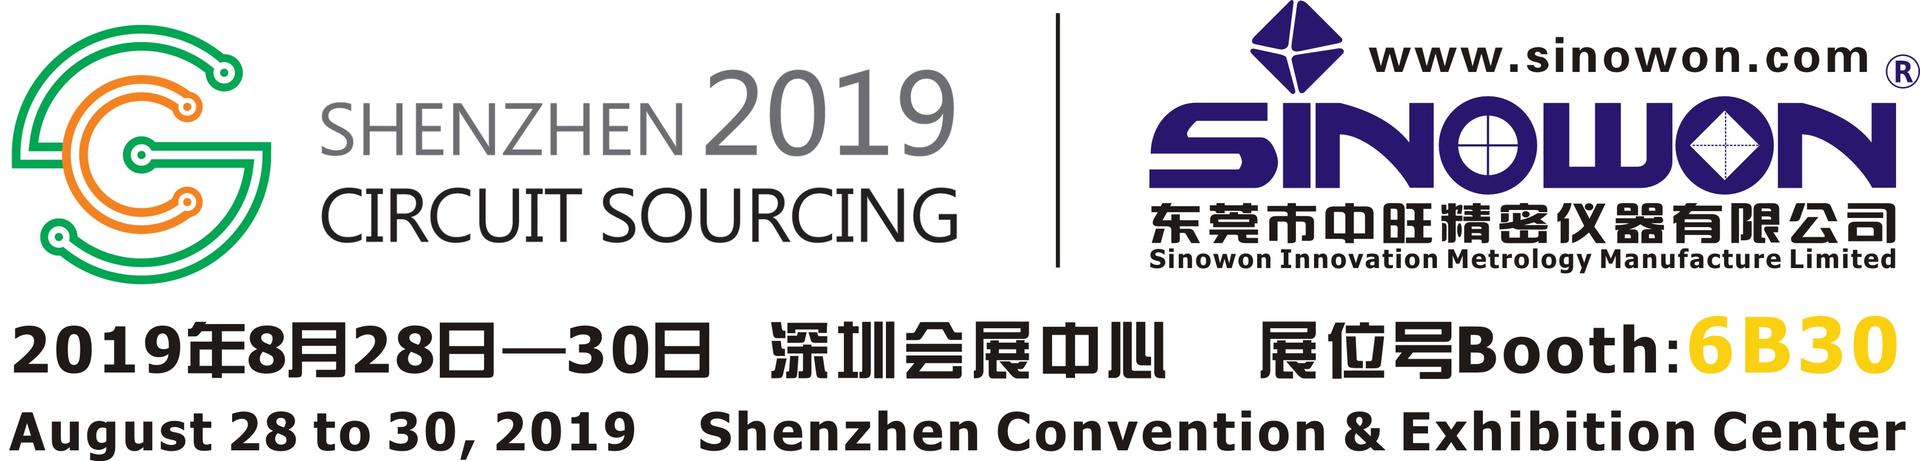 Sinowon sincerely invites you to attend the Circuit Sourcing Show 2019